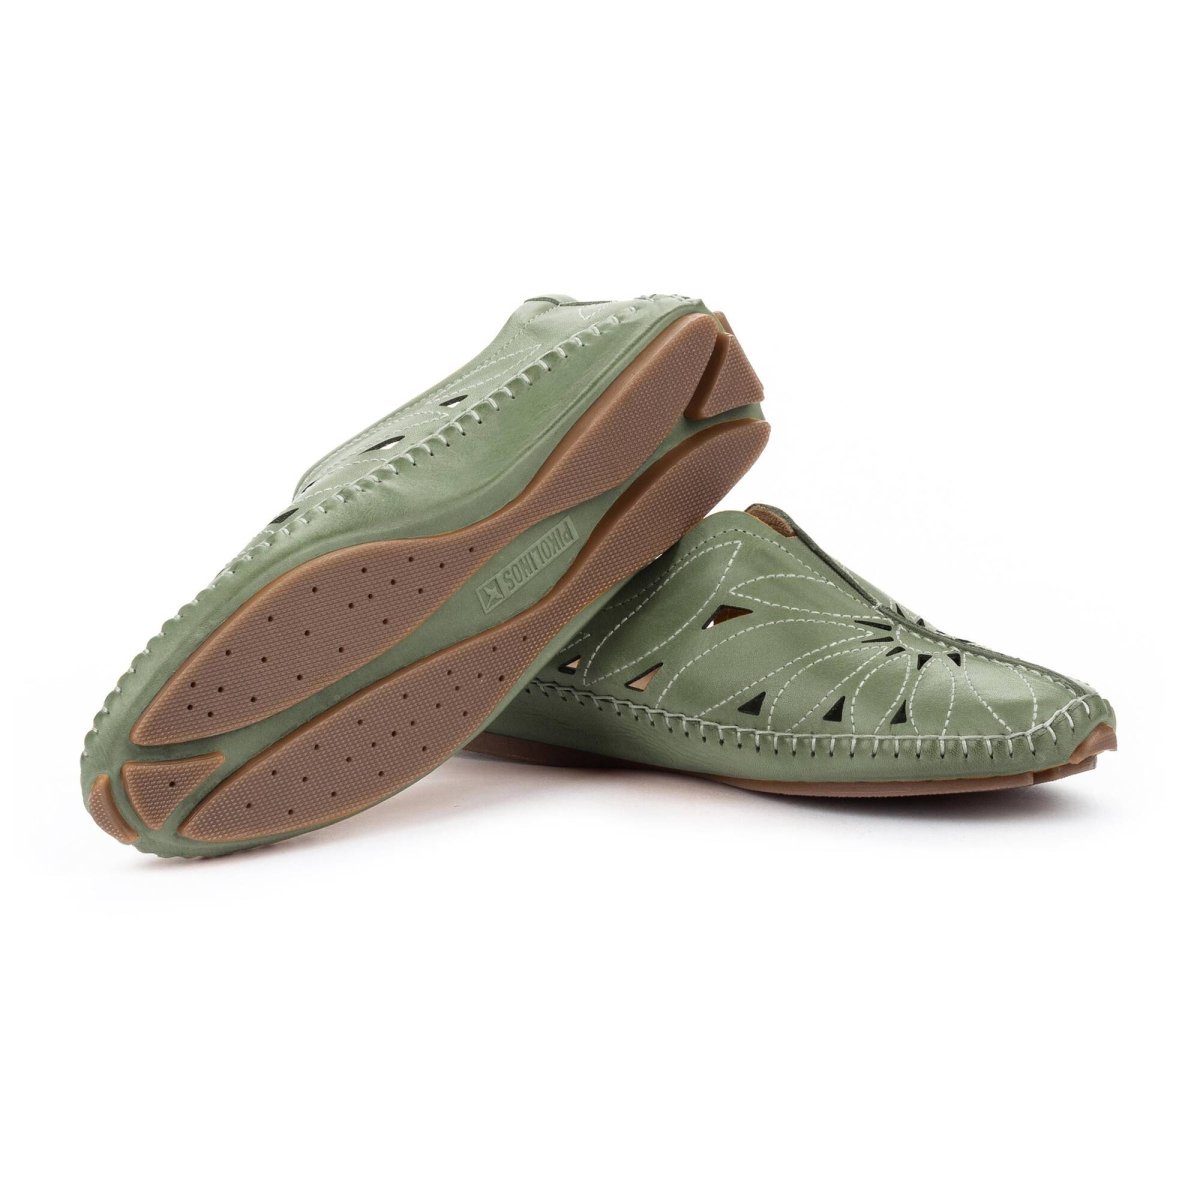 PIKOLINOS JEREZ 578-7399 WOMEN'S LOAFERS SLIP-ON MOCCASIN SHOES IN MINT GREEN - TLW Shoes